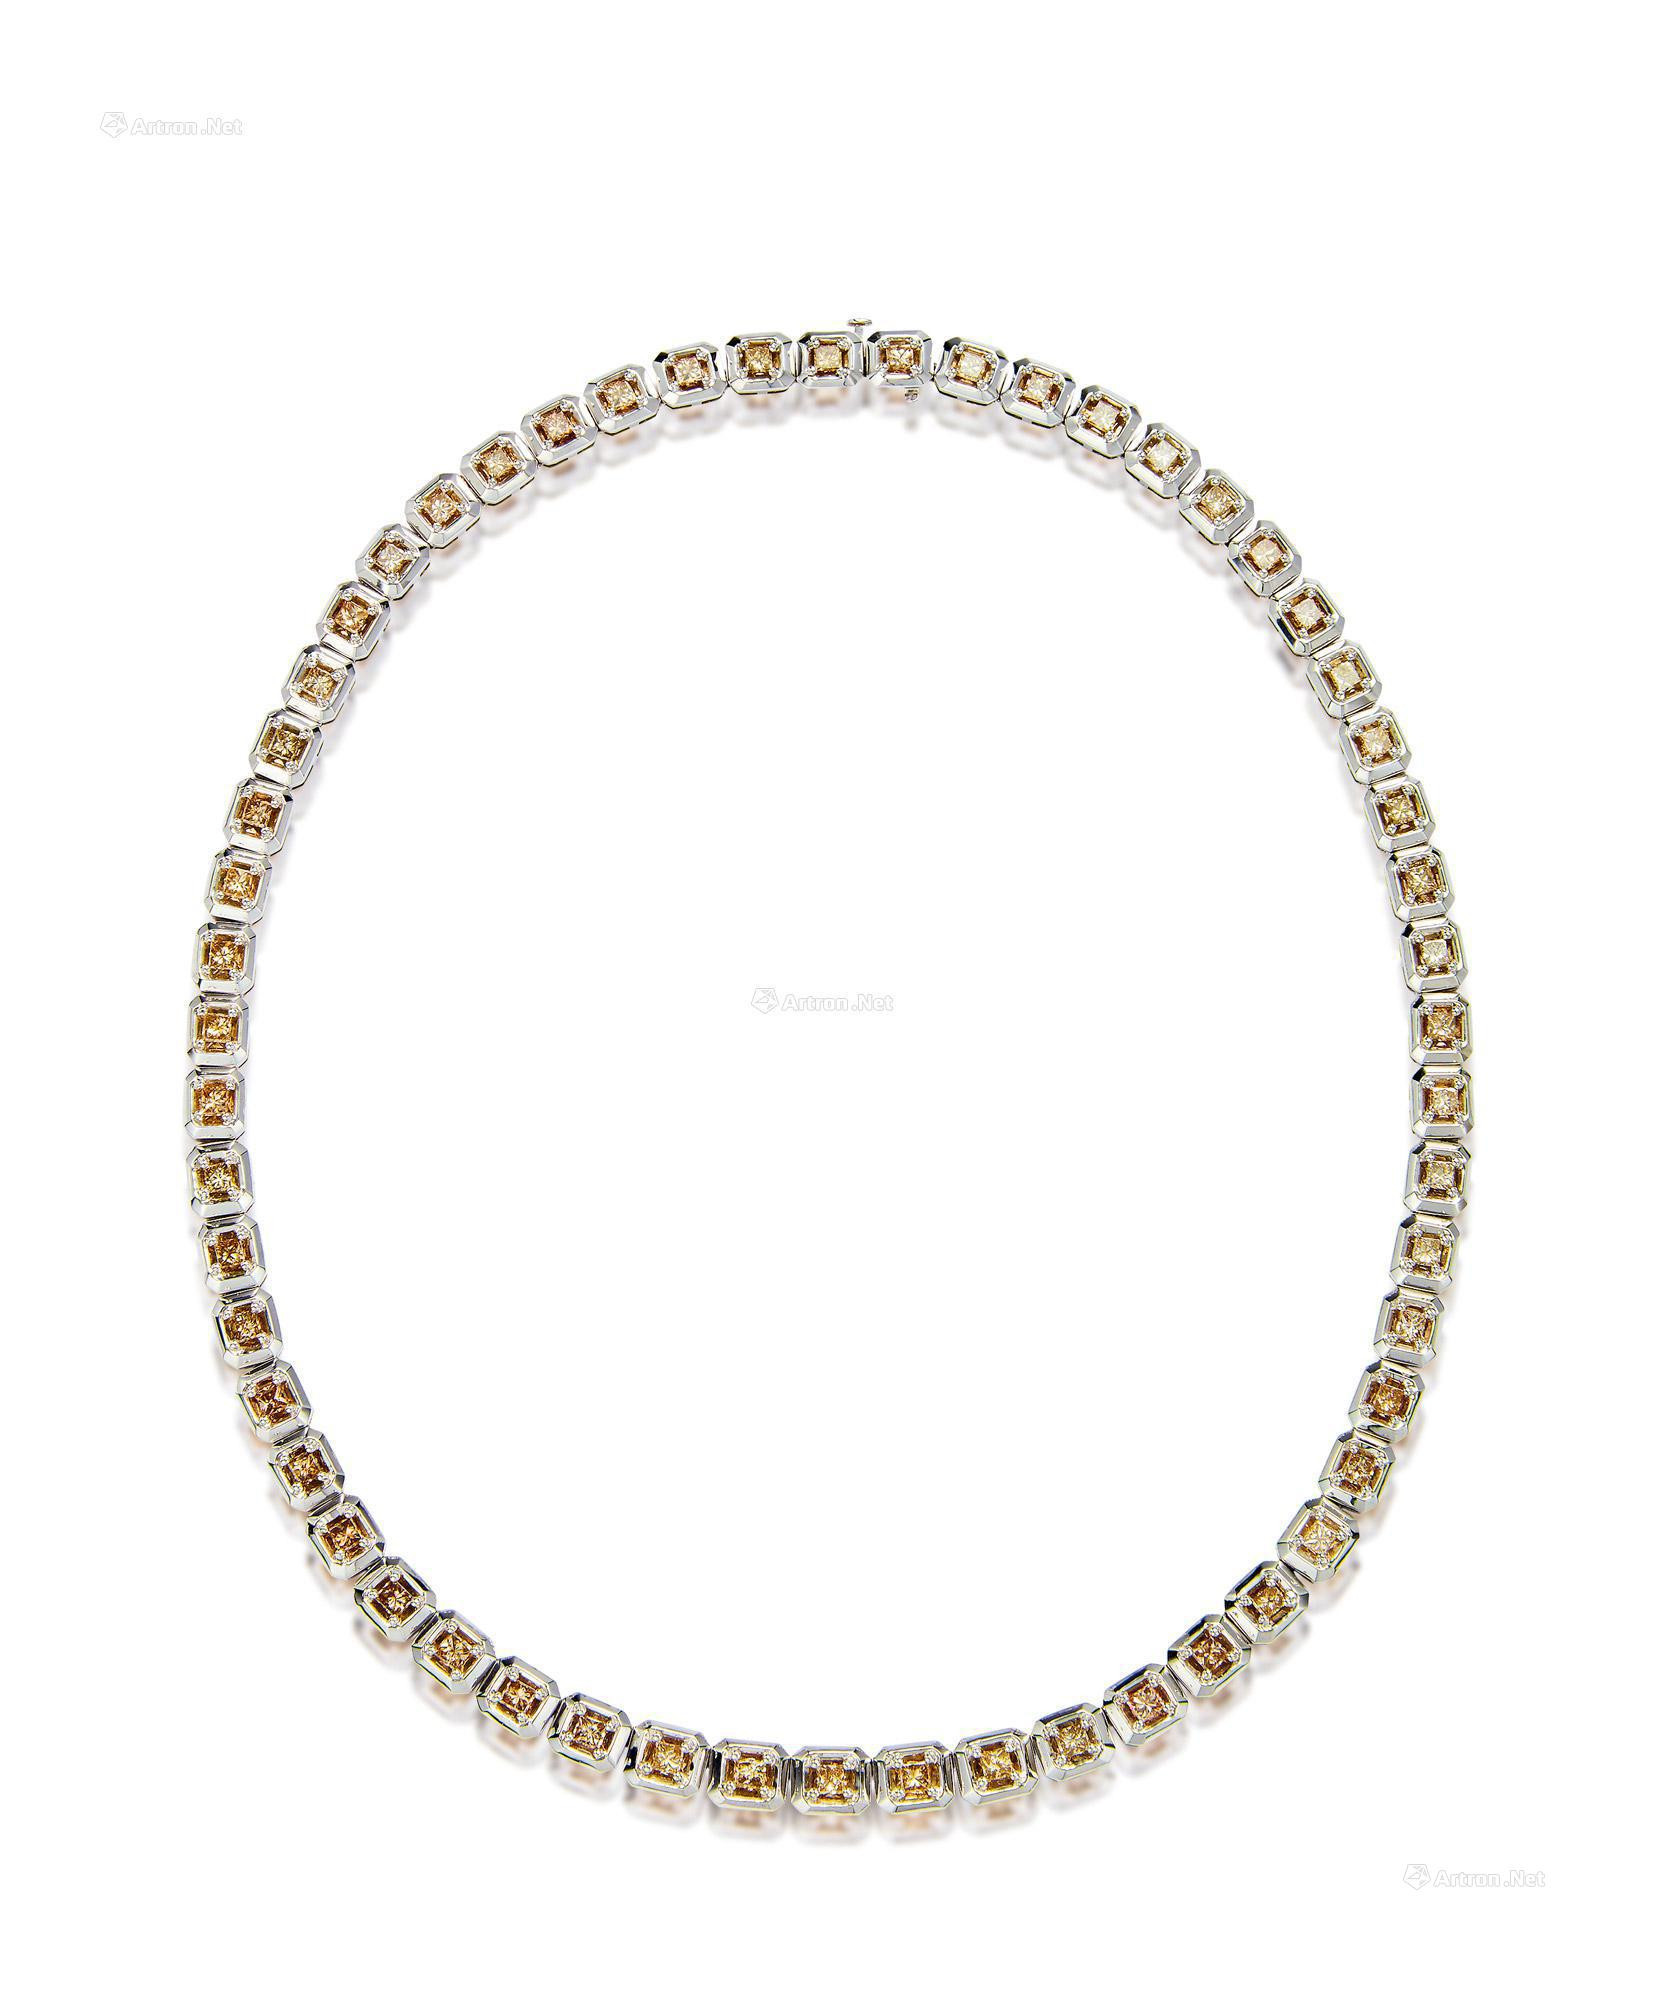 AN ALTOGETHER WEIGHING 7.05 CARATS DIAMOND NECKLACE MOUNTED IN 18K WHITE GOLD